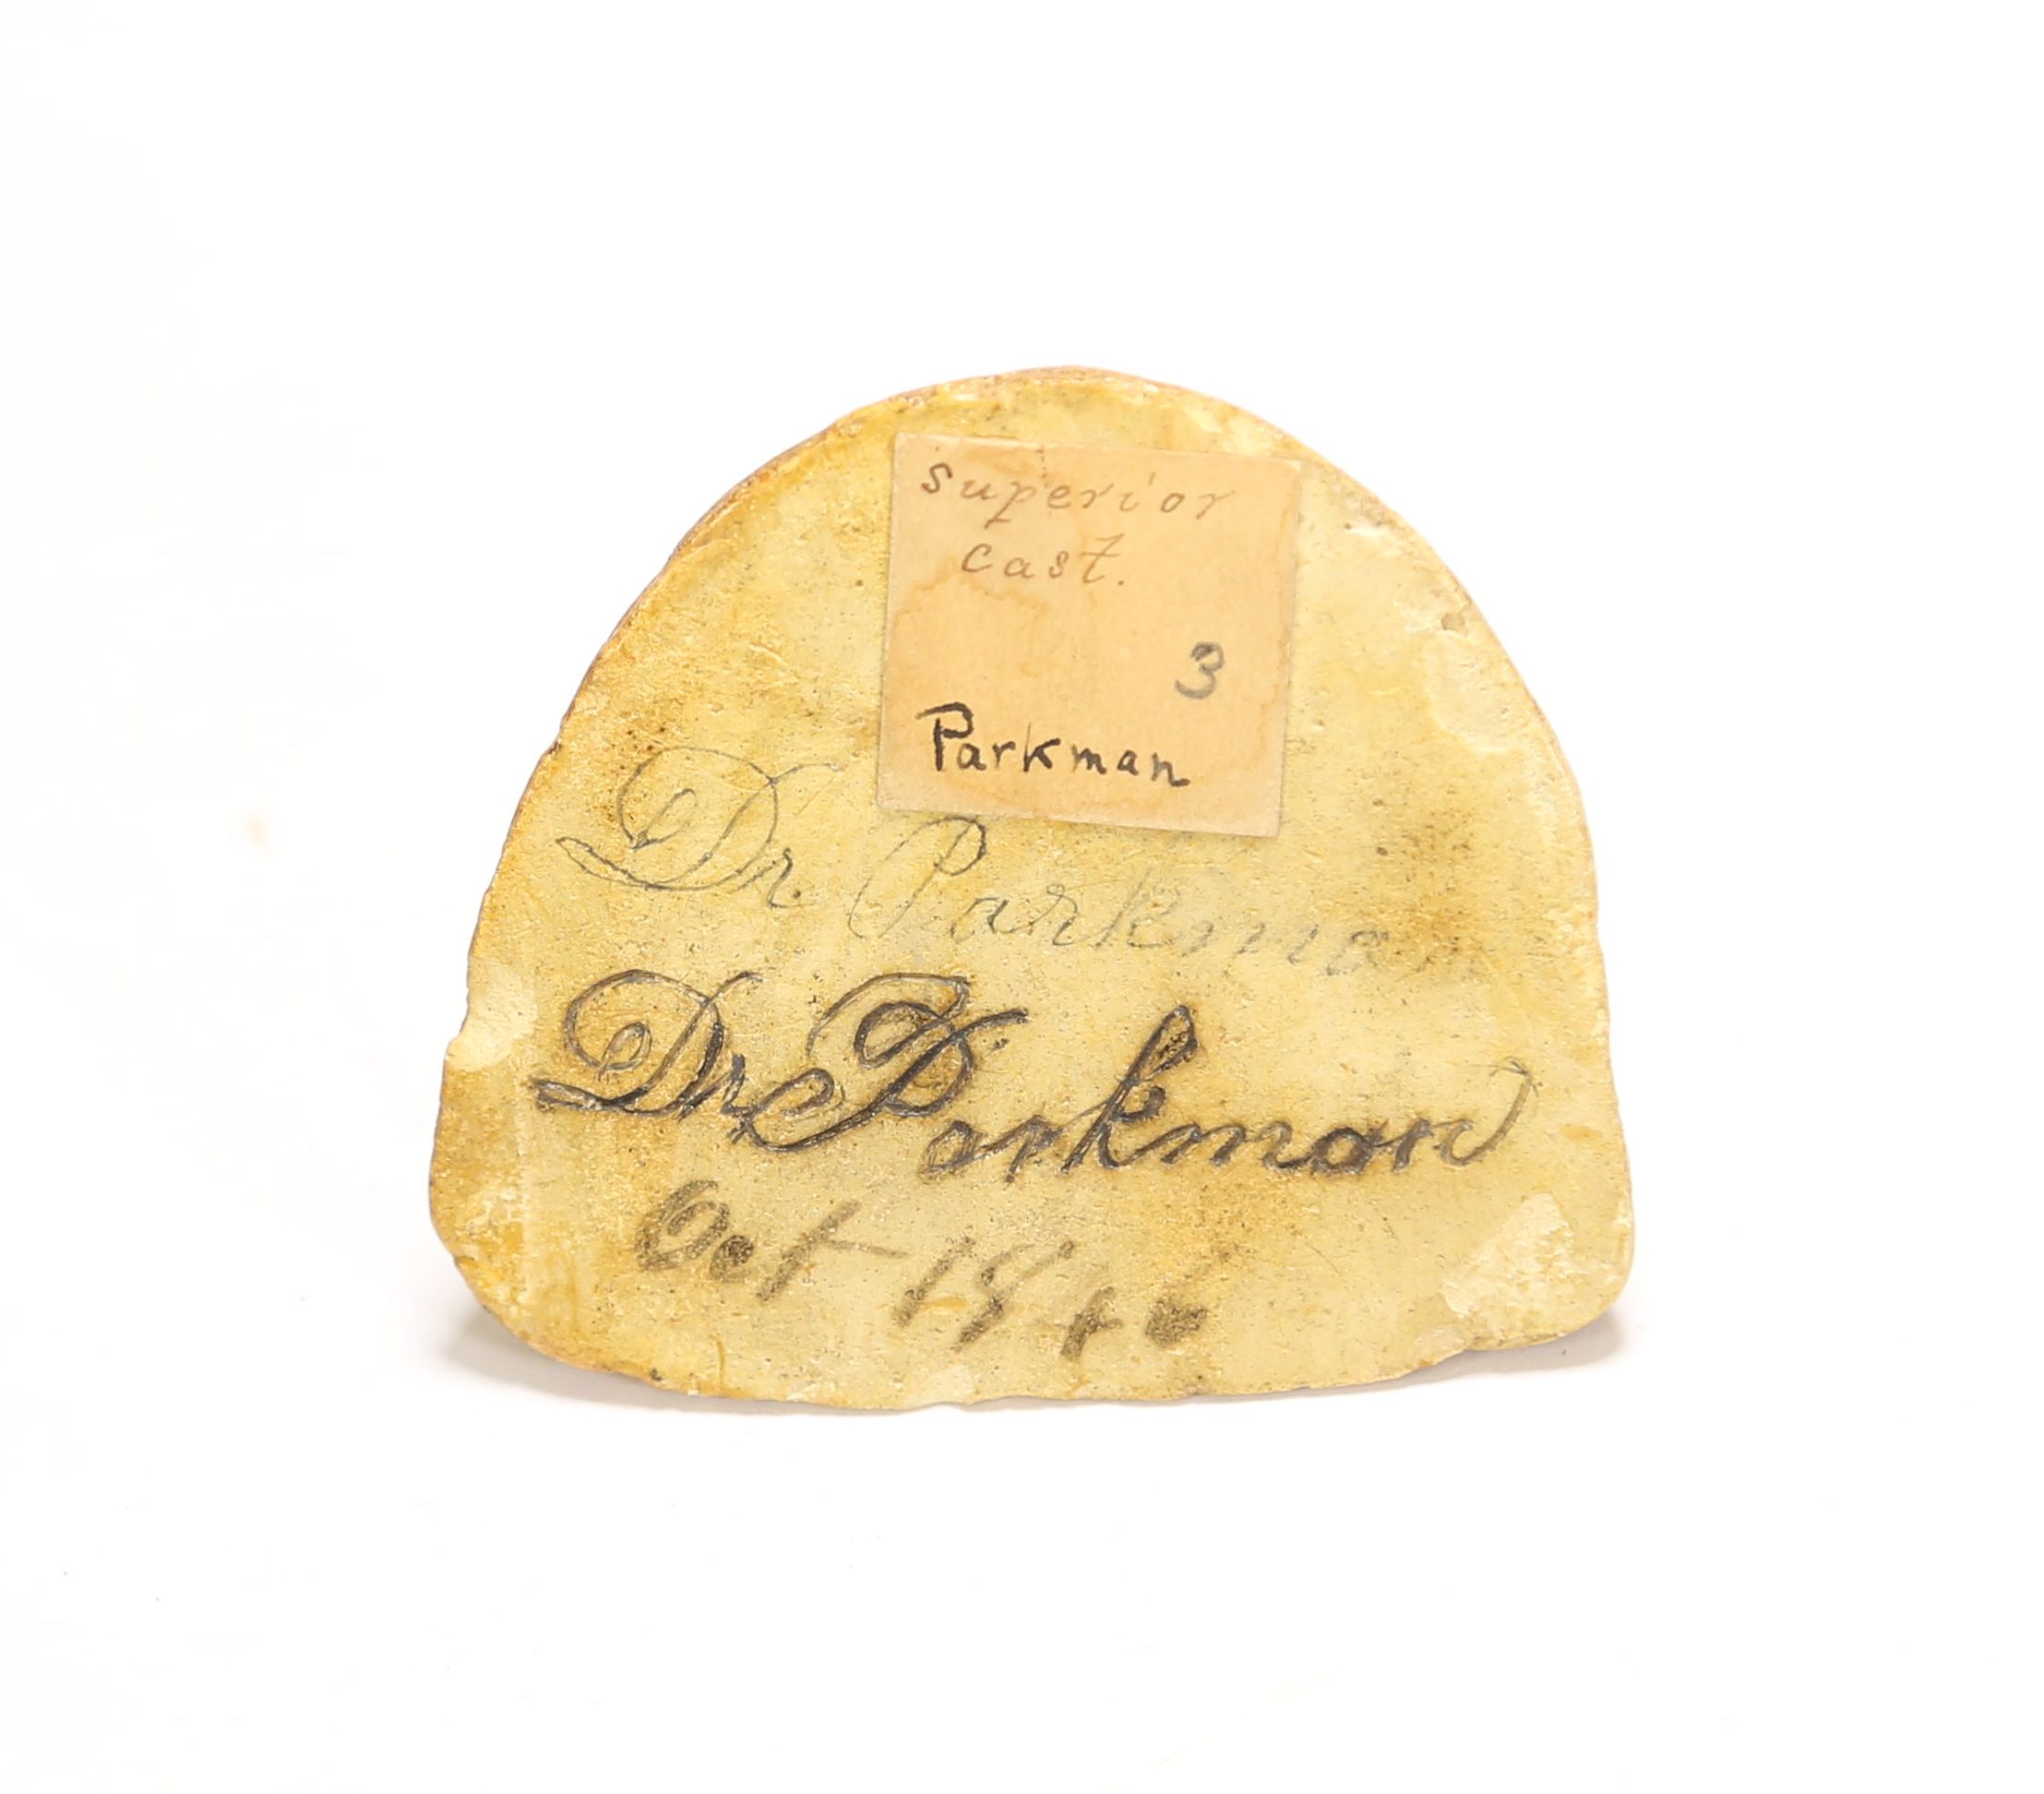 underside of superior dental cast with a label that says superior cast 3 Parkman, two signatures from Dr. Parkman directly into the wet plaster, and the date of Oct 1846